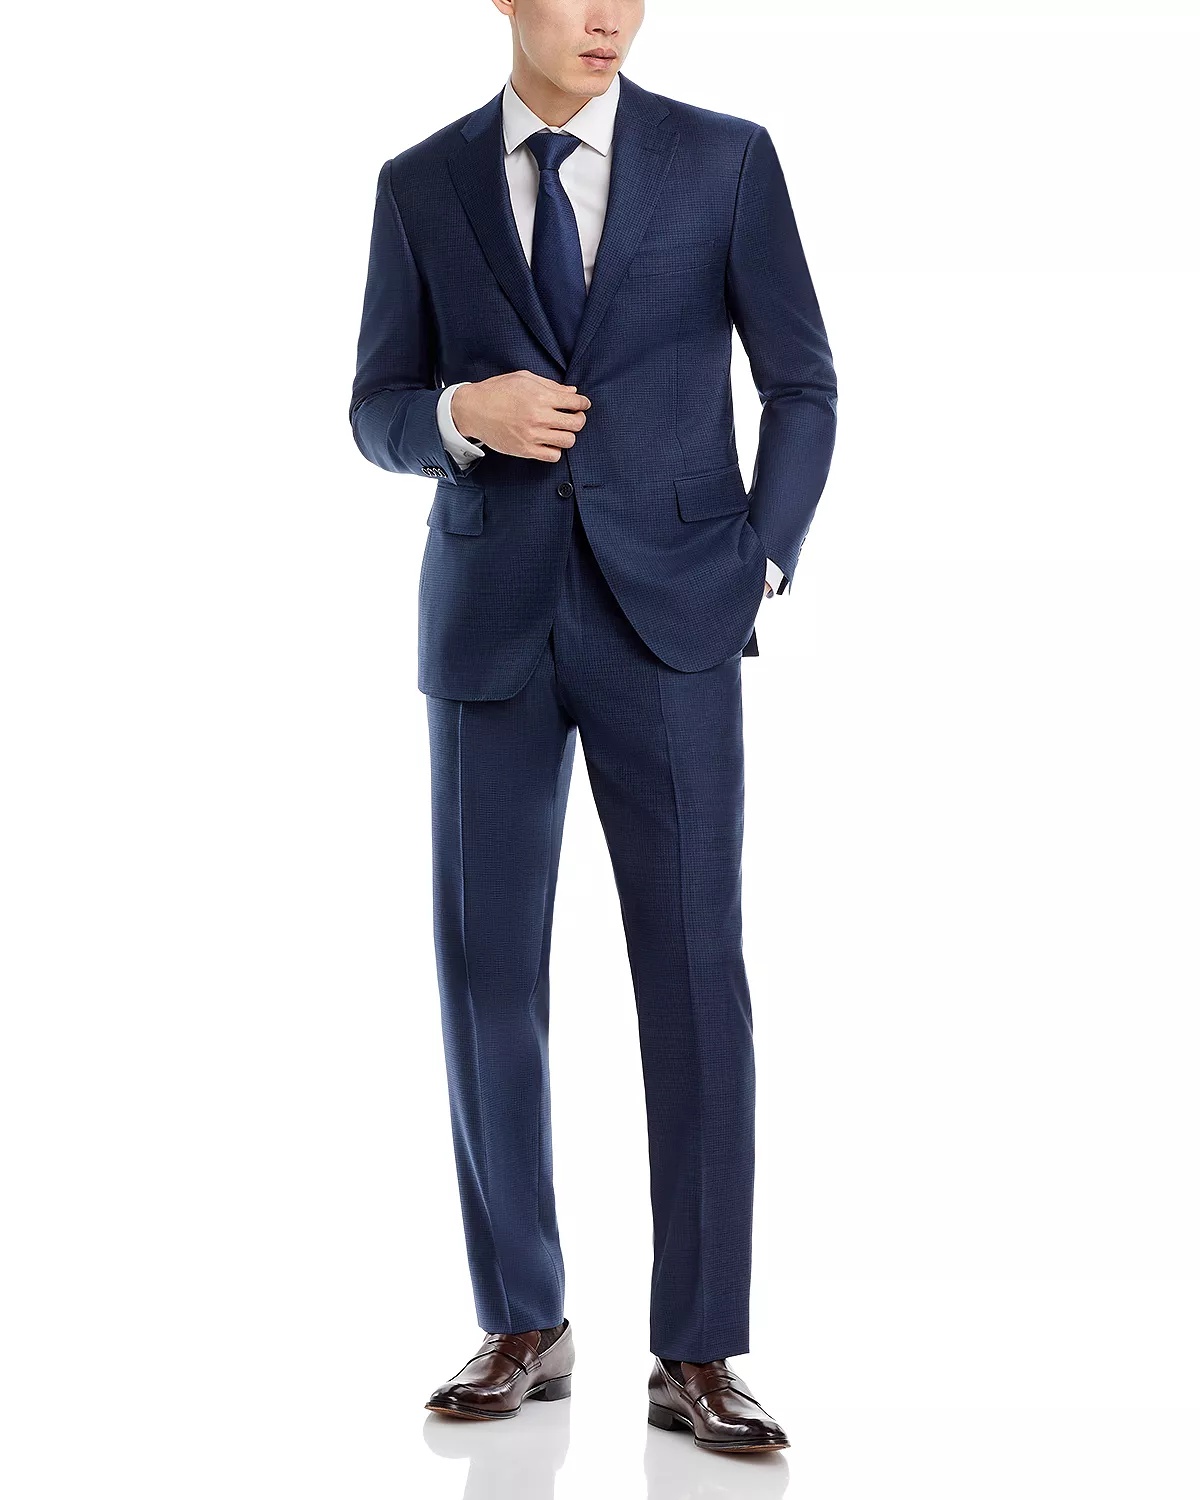 Siena Sharkskin Micro Check Classic Fit Suit - 2